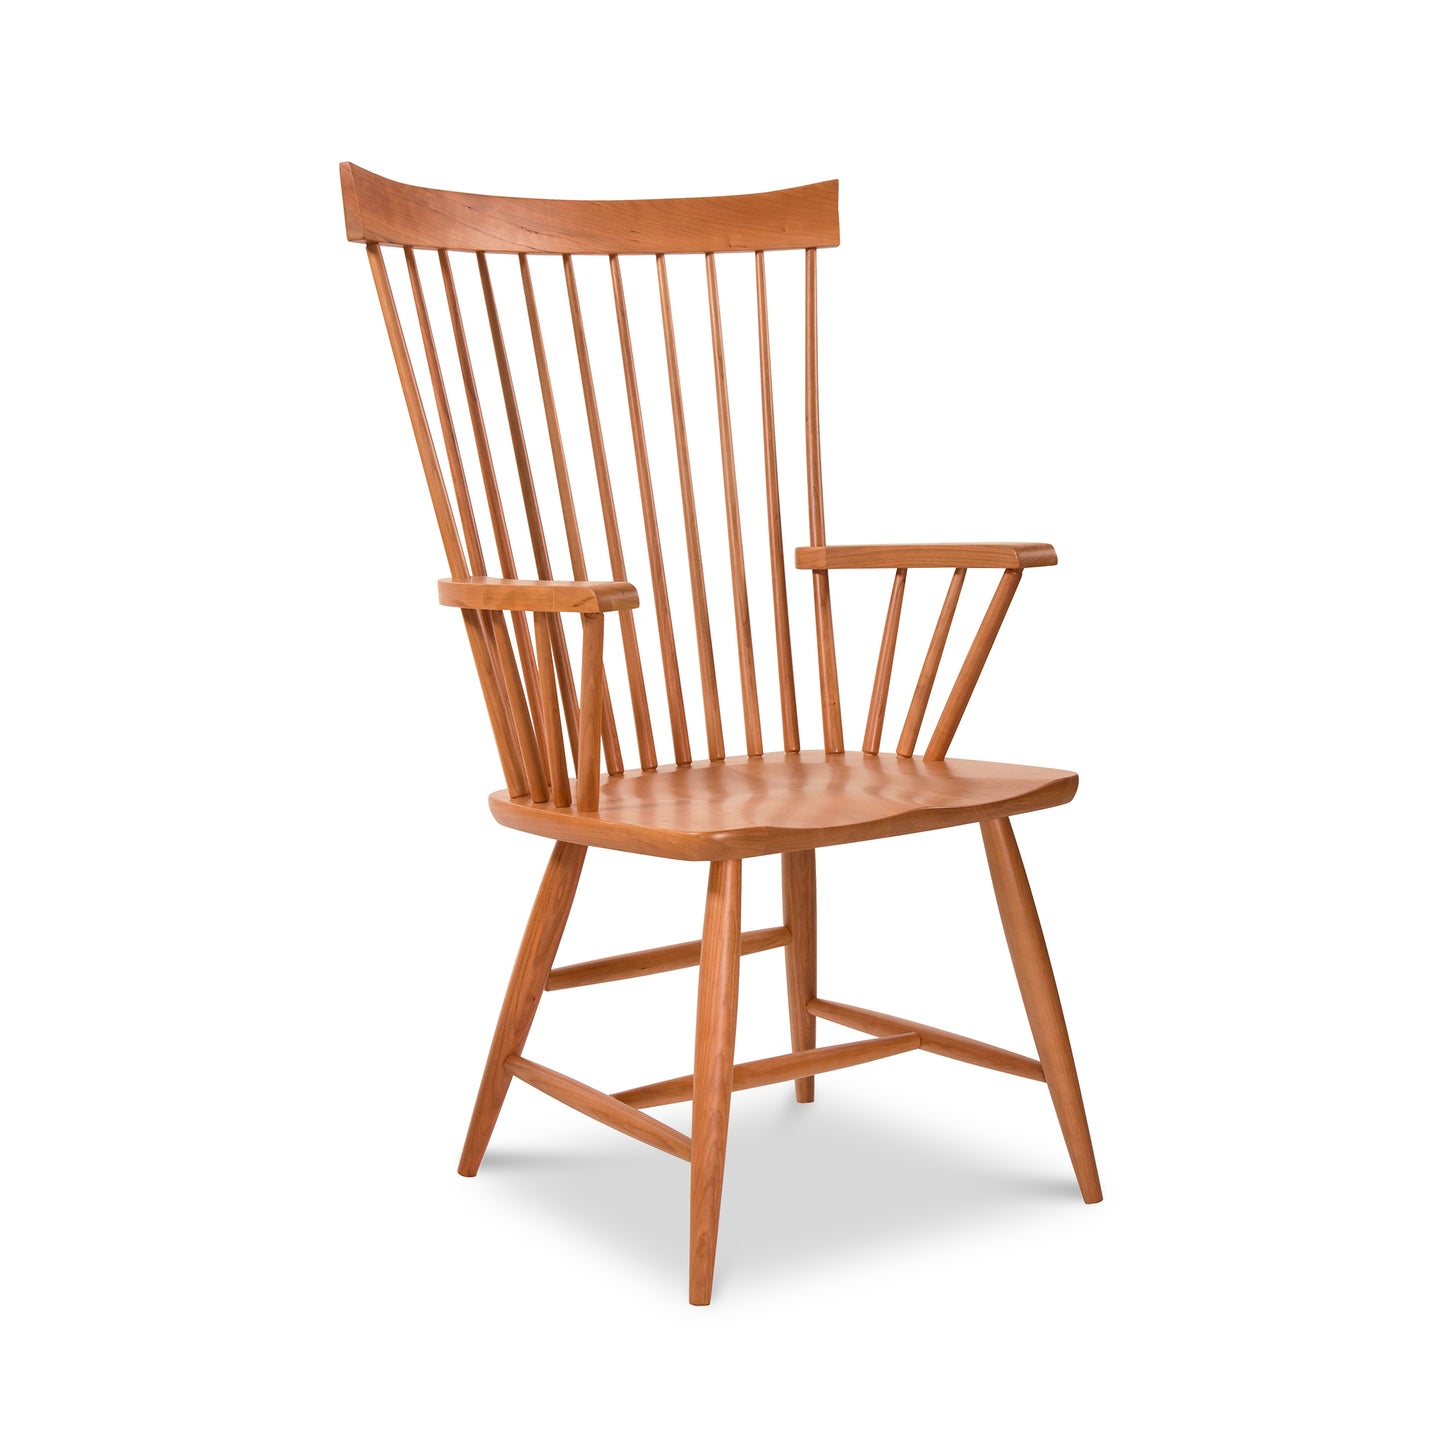 A high-end Country Windsor Chair by Lyndon Furniture, with a contemporary flair, featuring a wooden seat and arms.